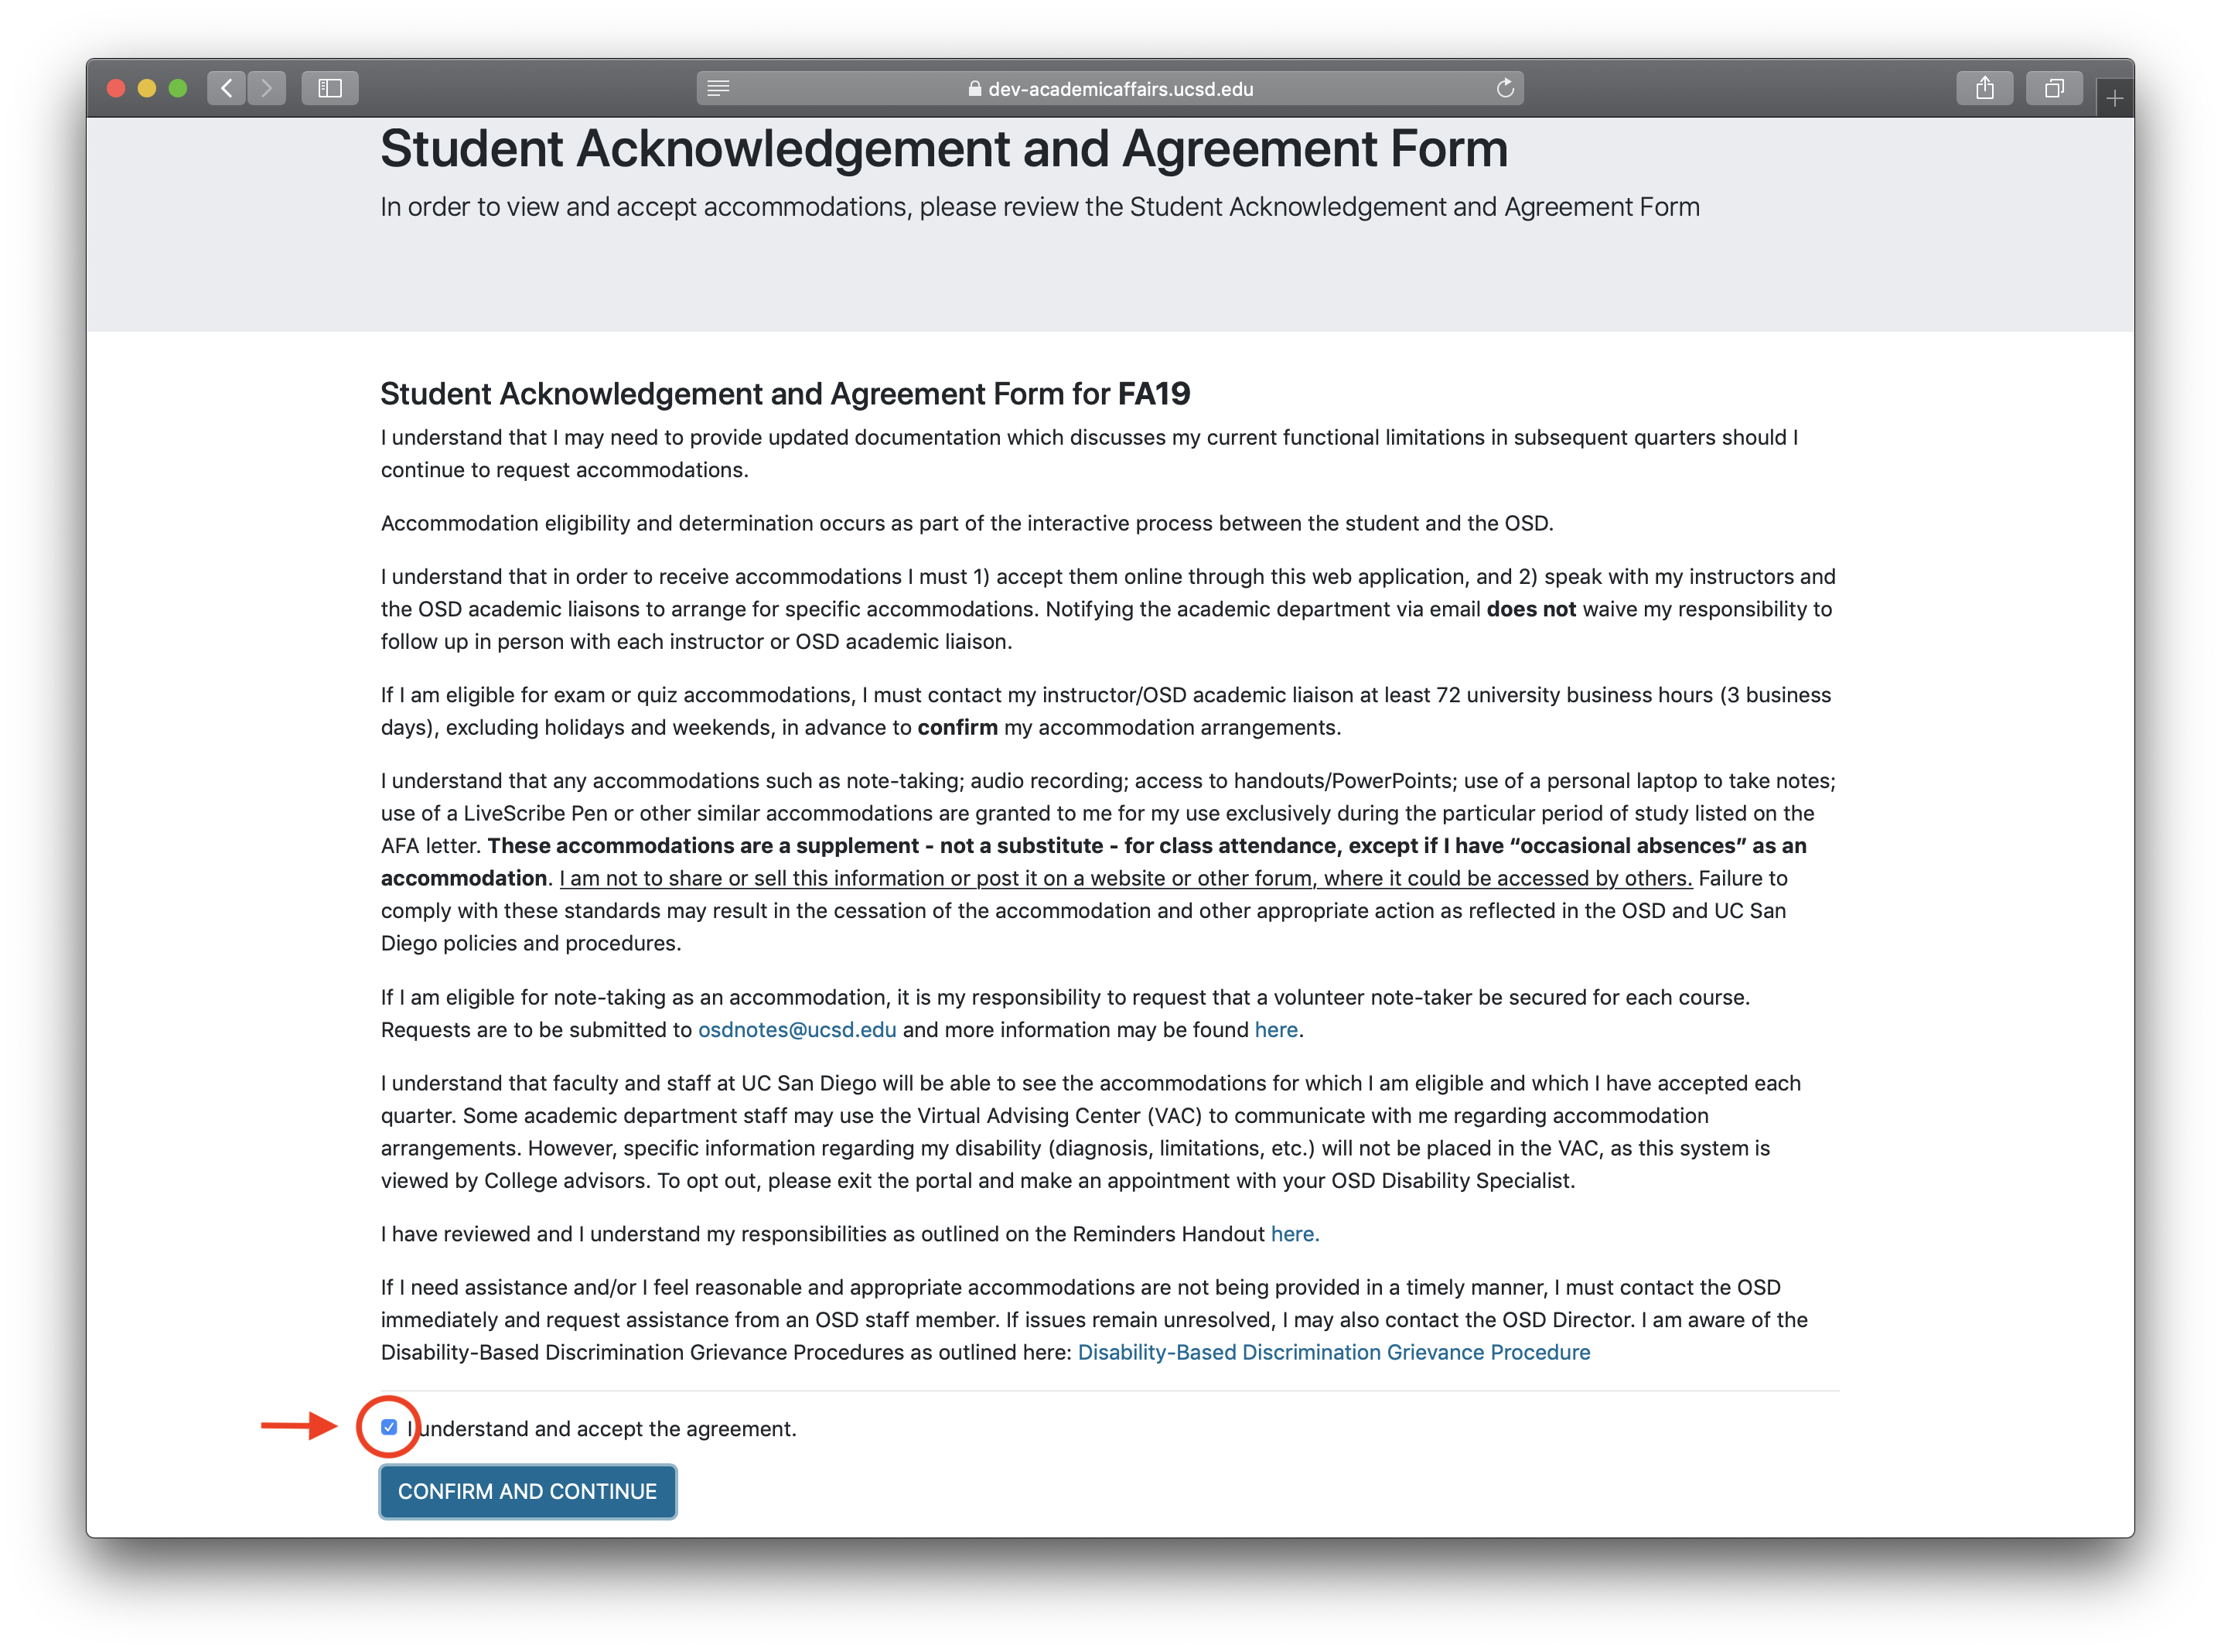 Screenshot of the Student Acknowledgement and Agreement Form with the checkbox highlighted.